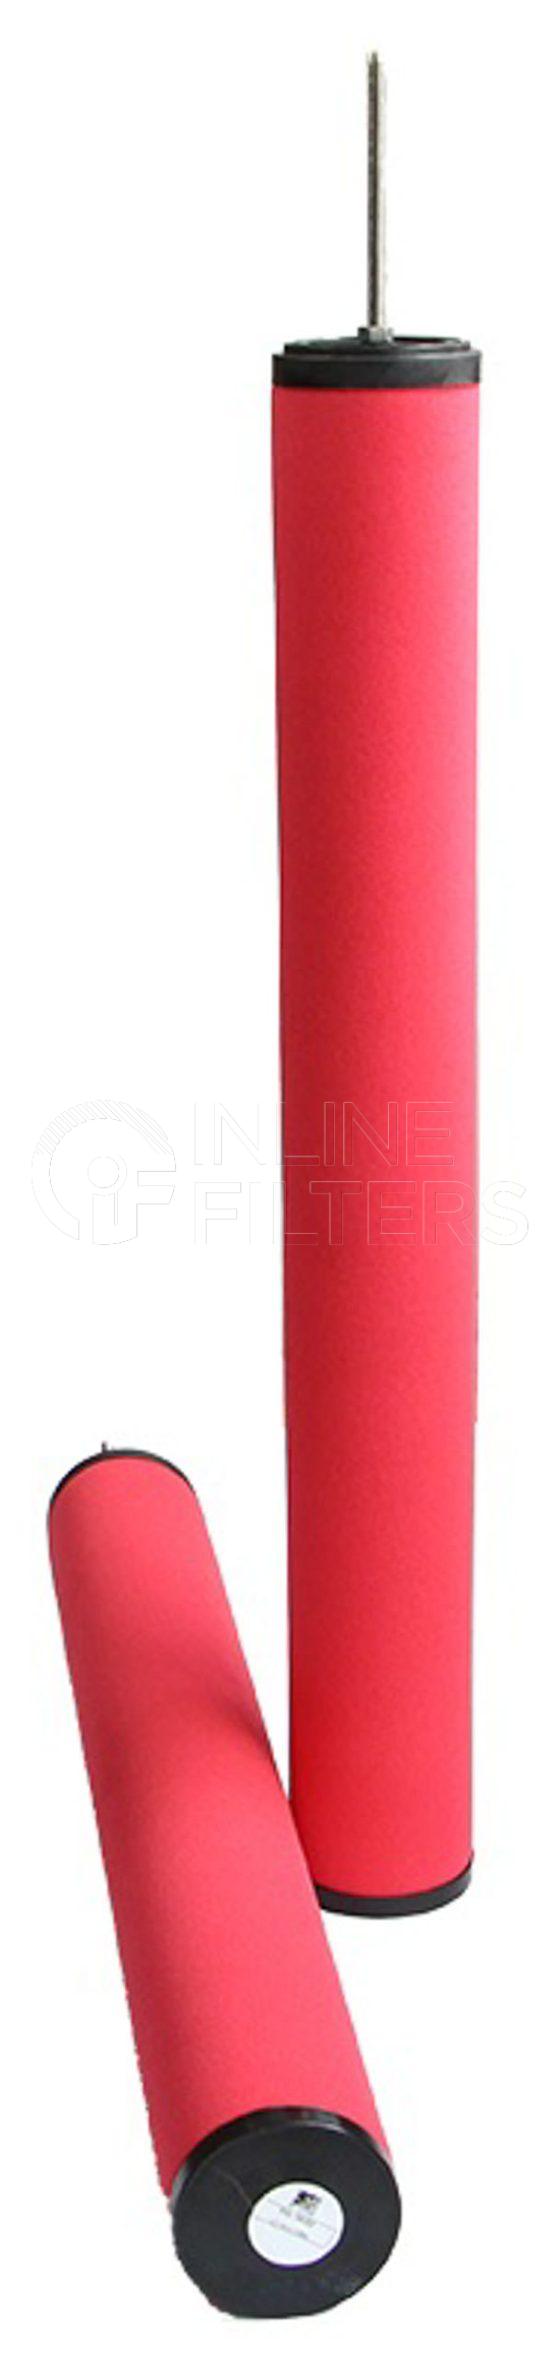 Inline FA10553. Air Filter Product – Compressed Air – Cartridge Product Air filter product